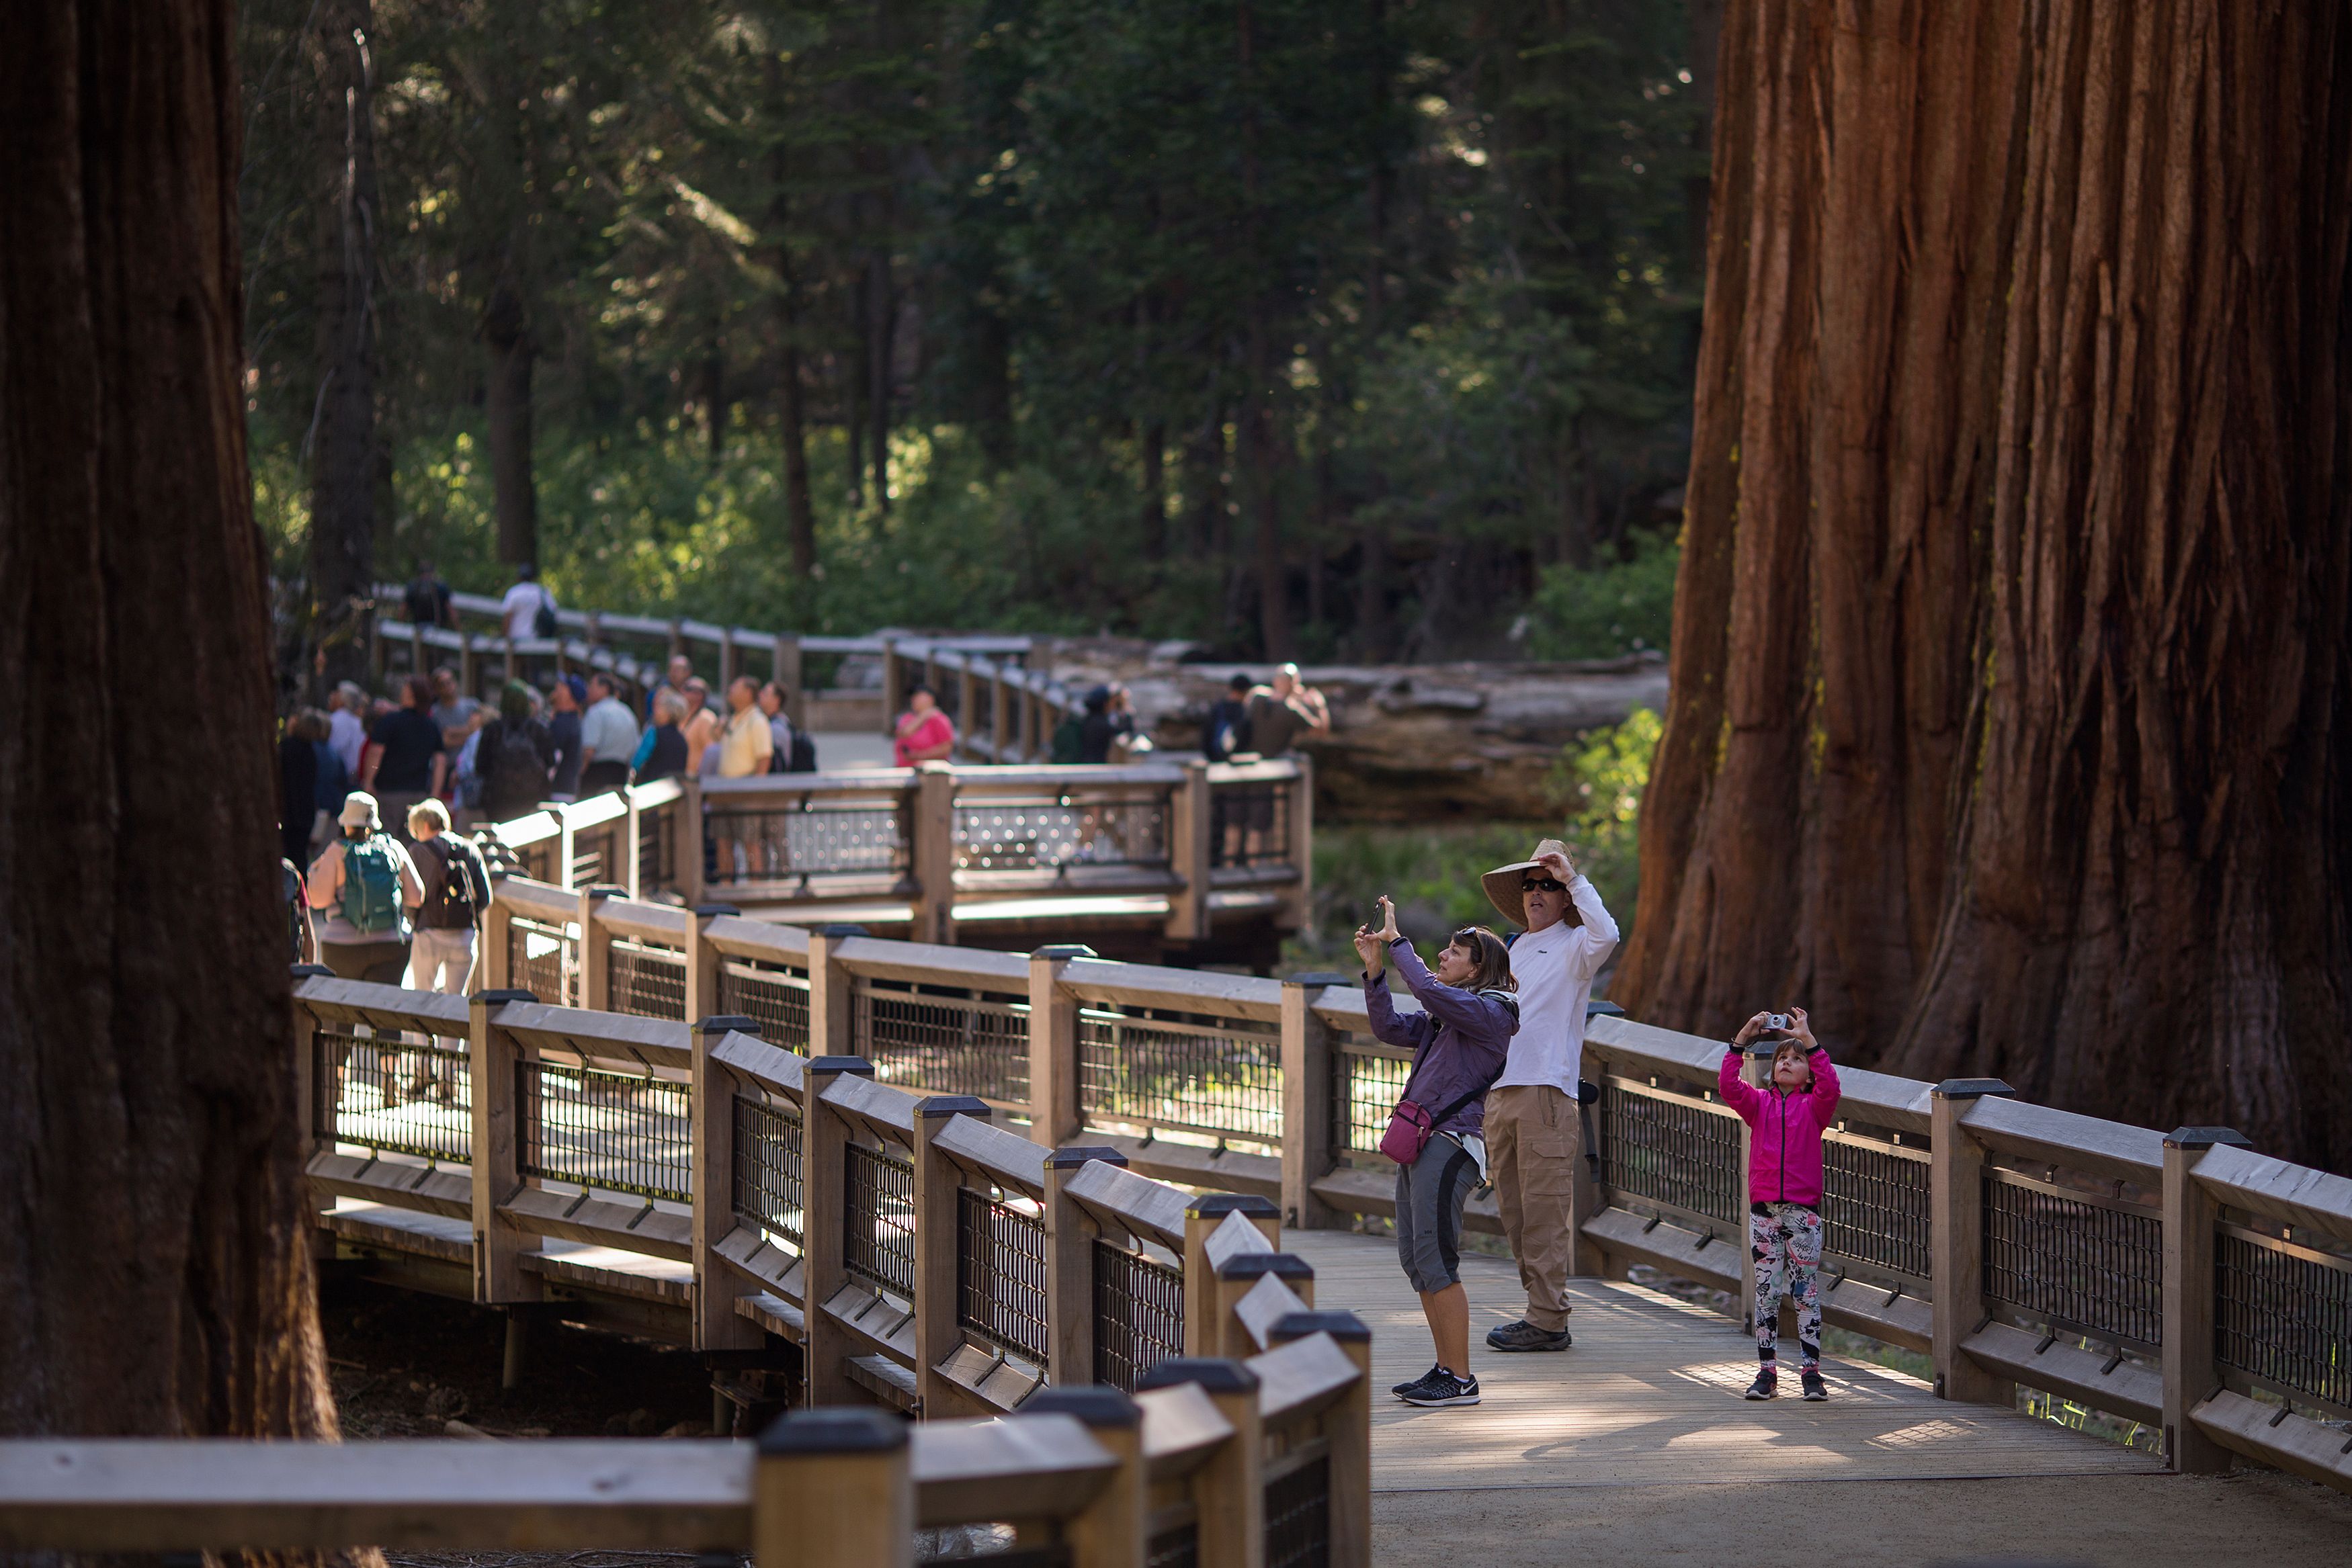 Yosemite To Reopen Thursday But Visitors Must Make Online Reservation